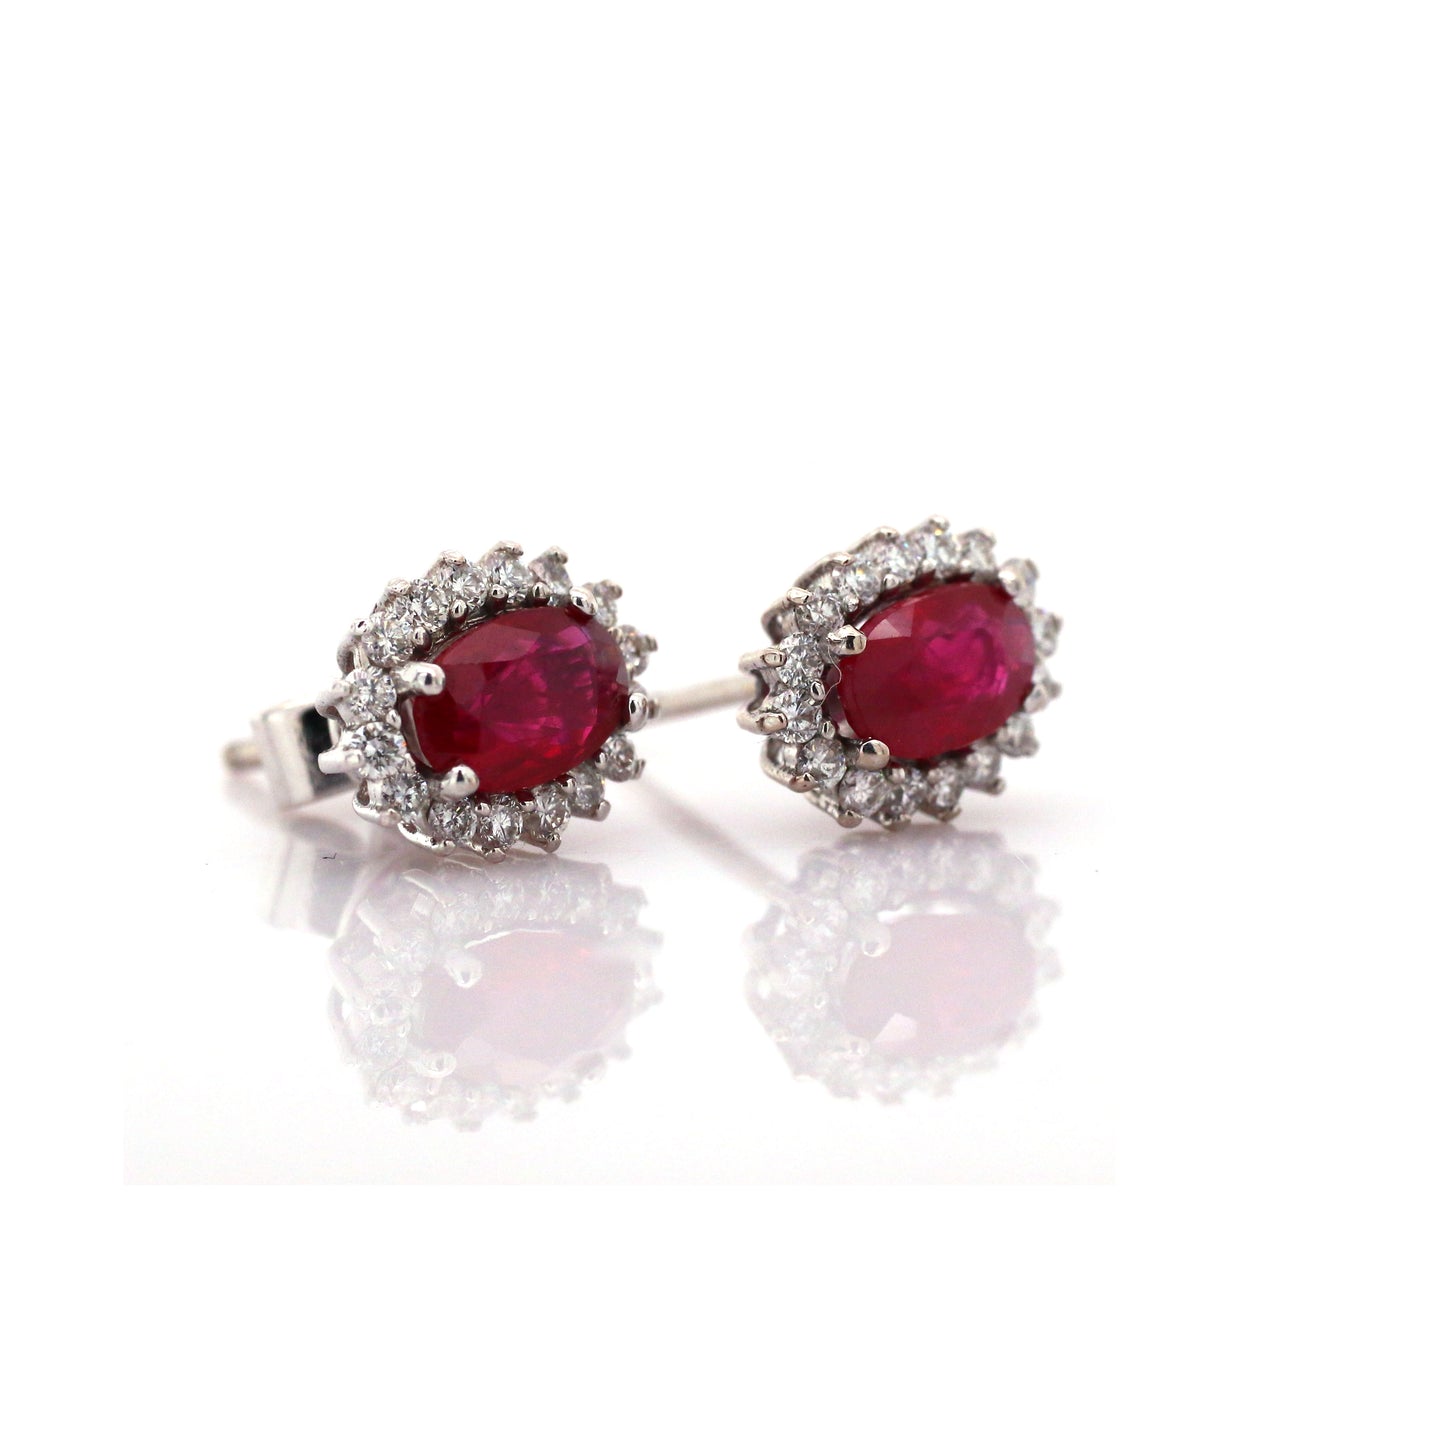 Beautiful and Almost Flawless Ruby has been Elegantly set with Natural Diamonds to create this 18kt White Gold Earring.